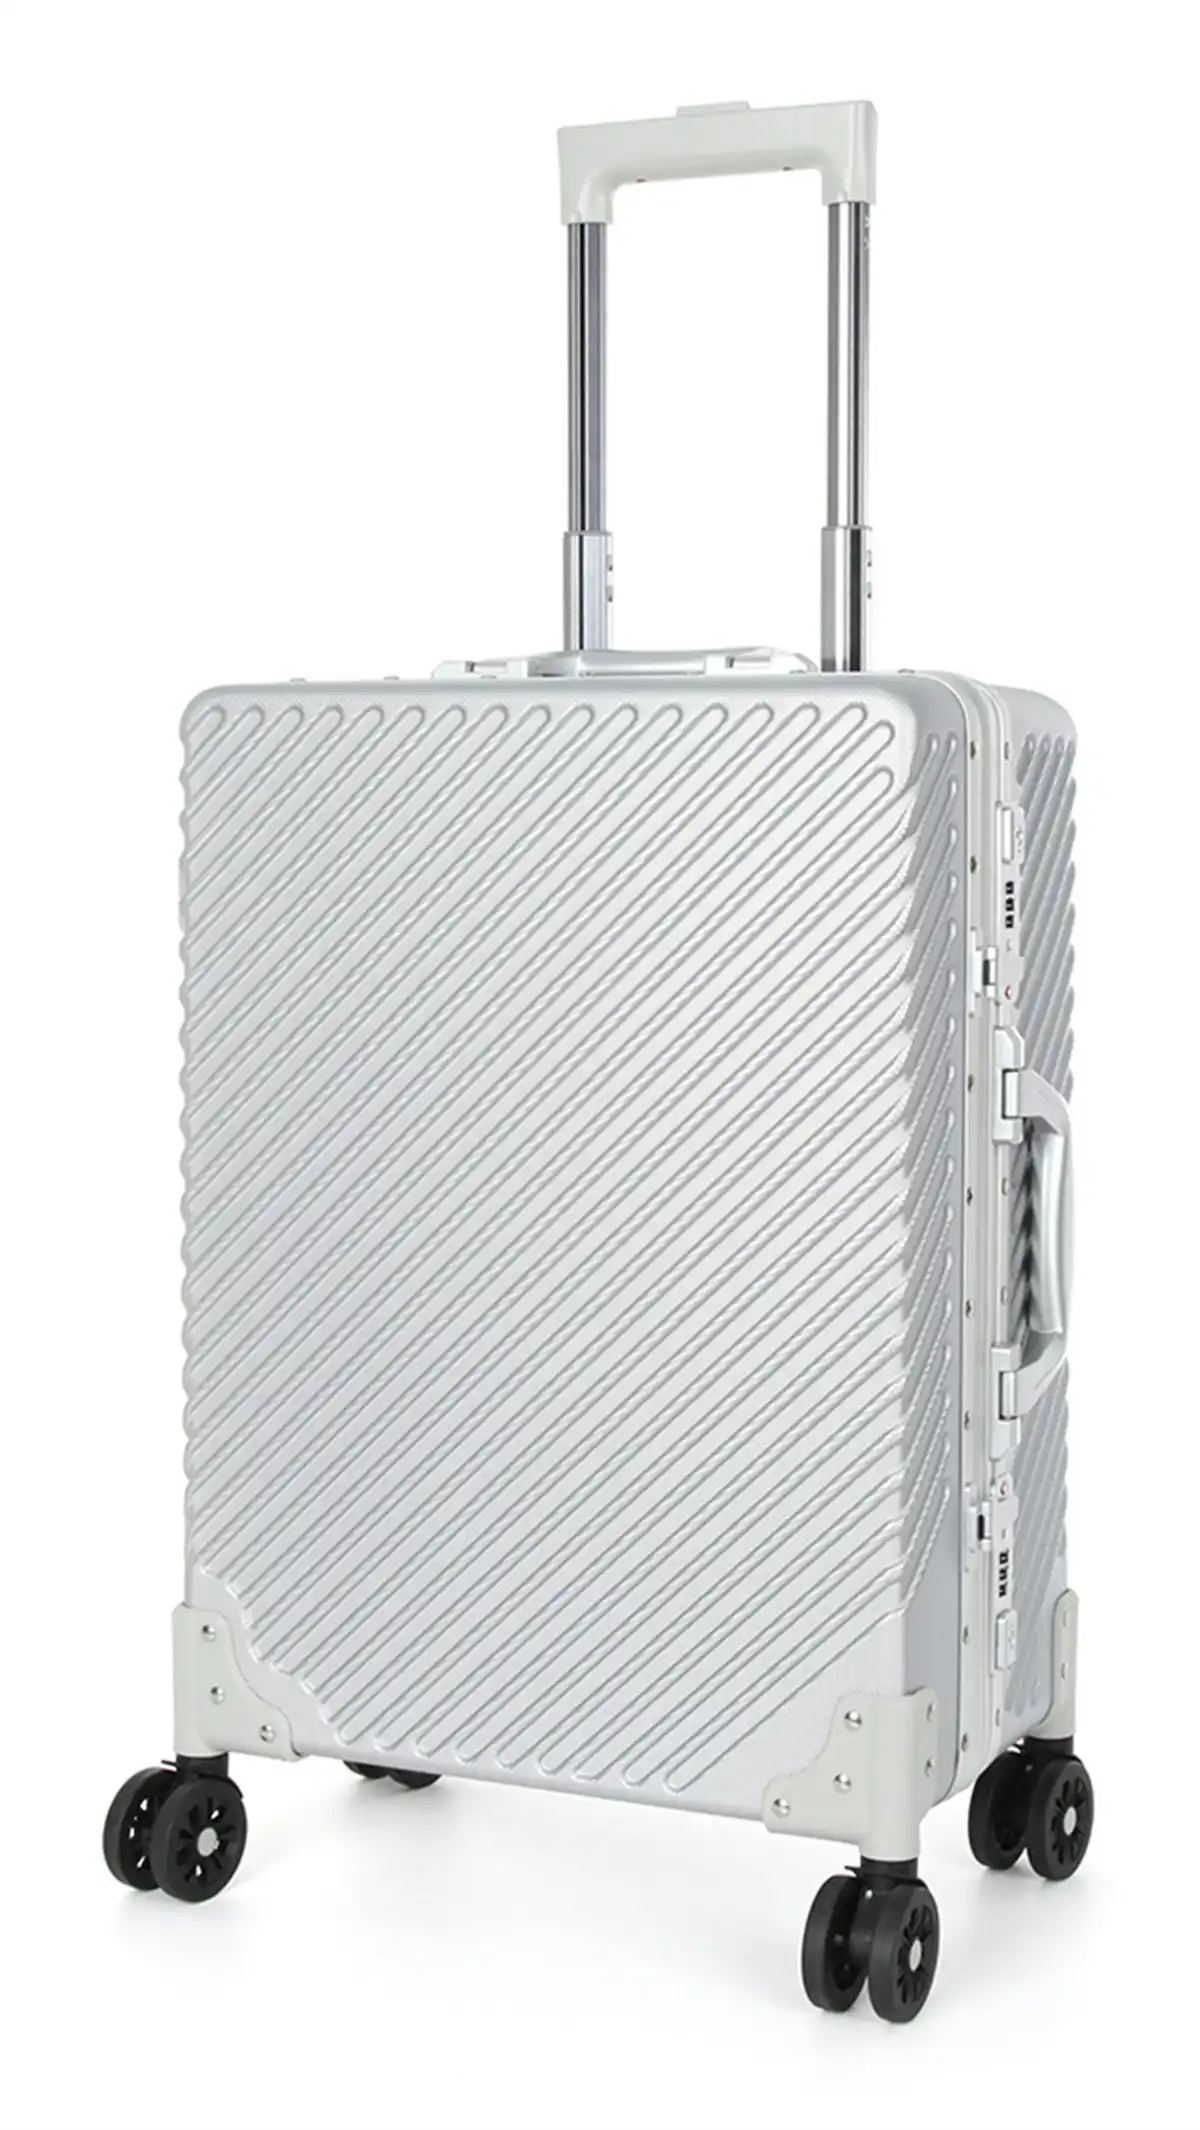 Suissewin Swiss Aluminium Luggage Suitcase Lightweight With TSA Locker 8 Wheels Carry on Hardcase SN7621A Silver